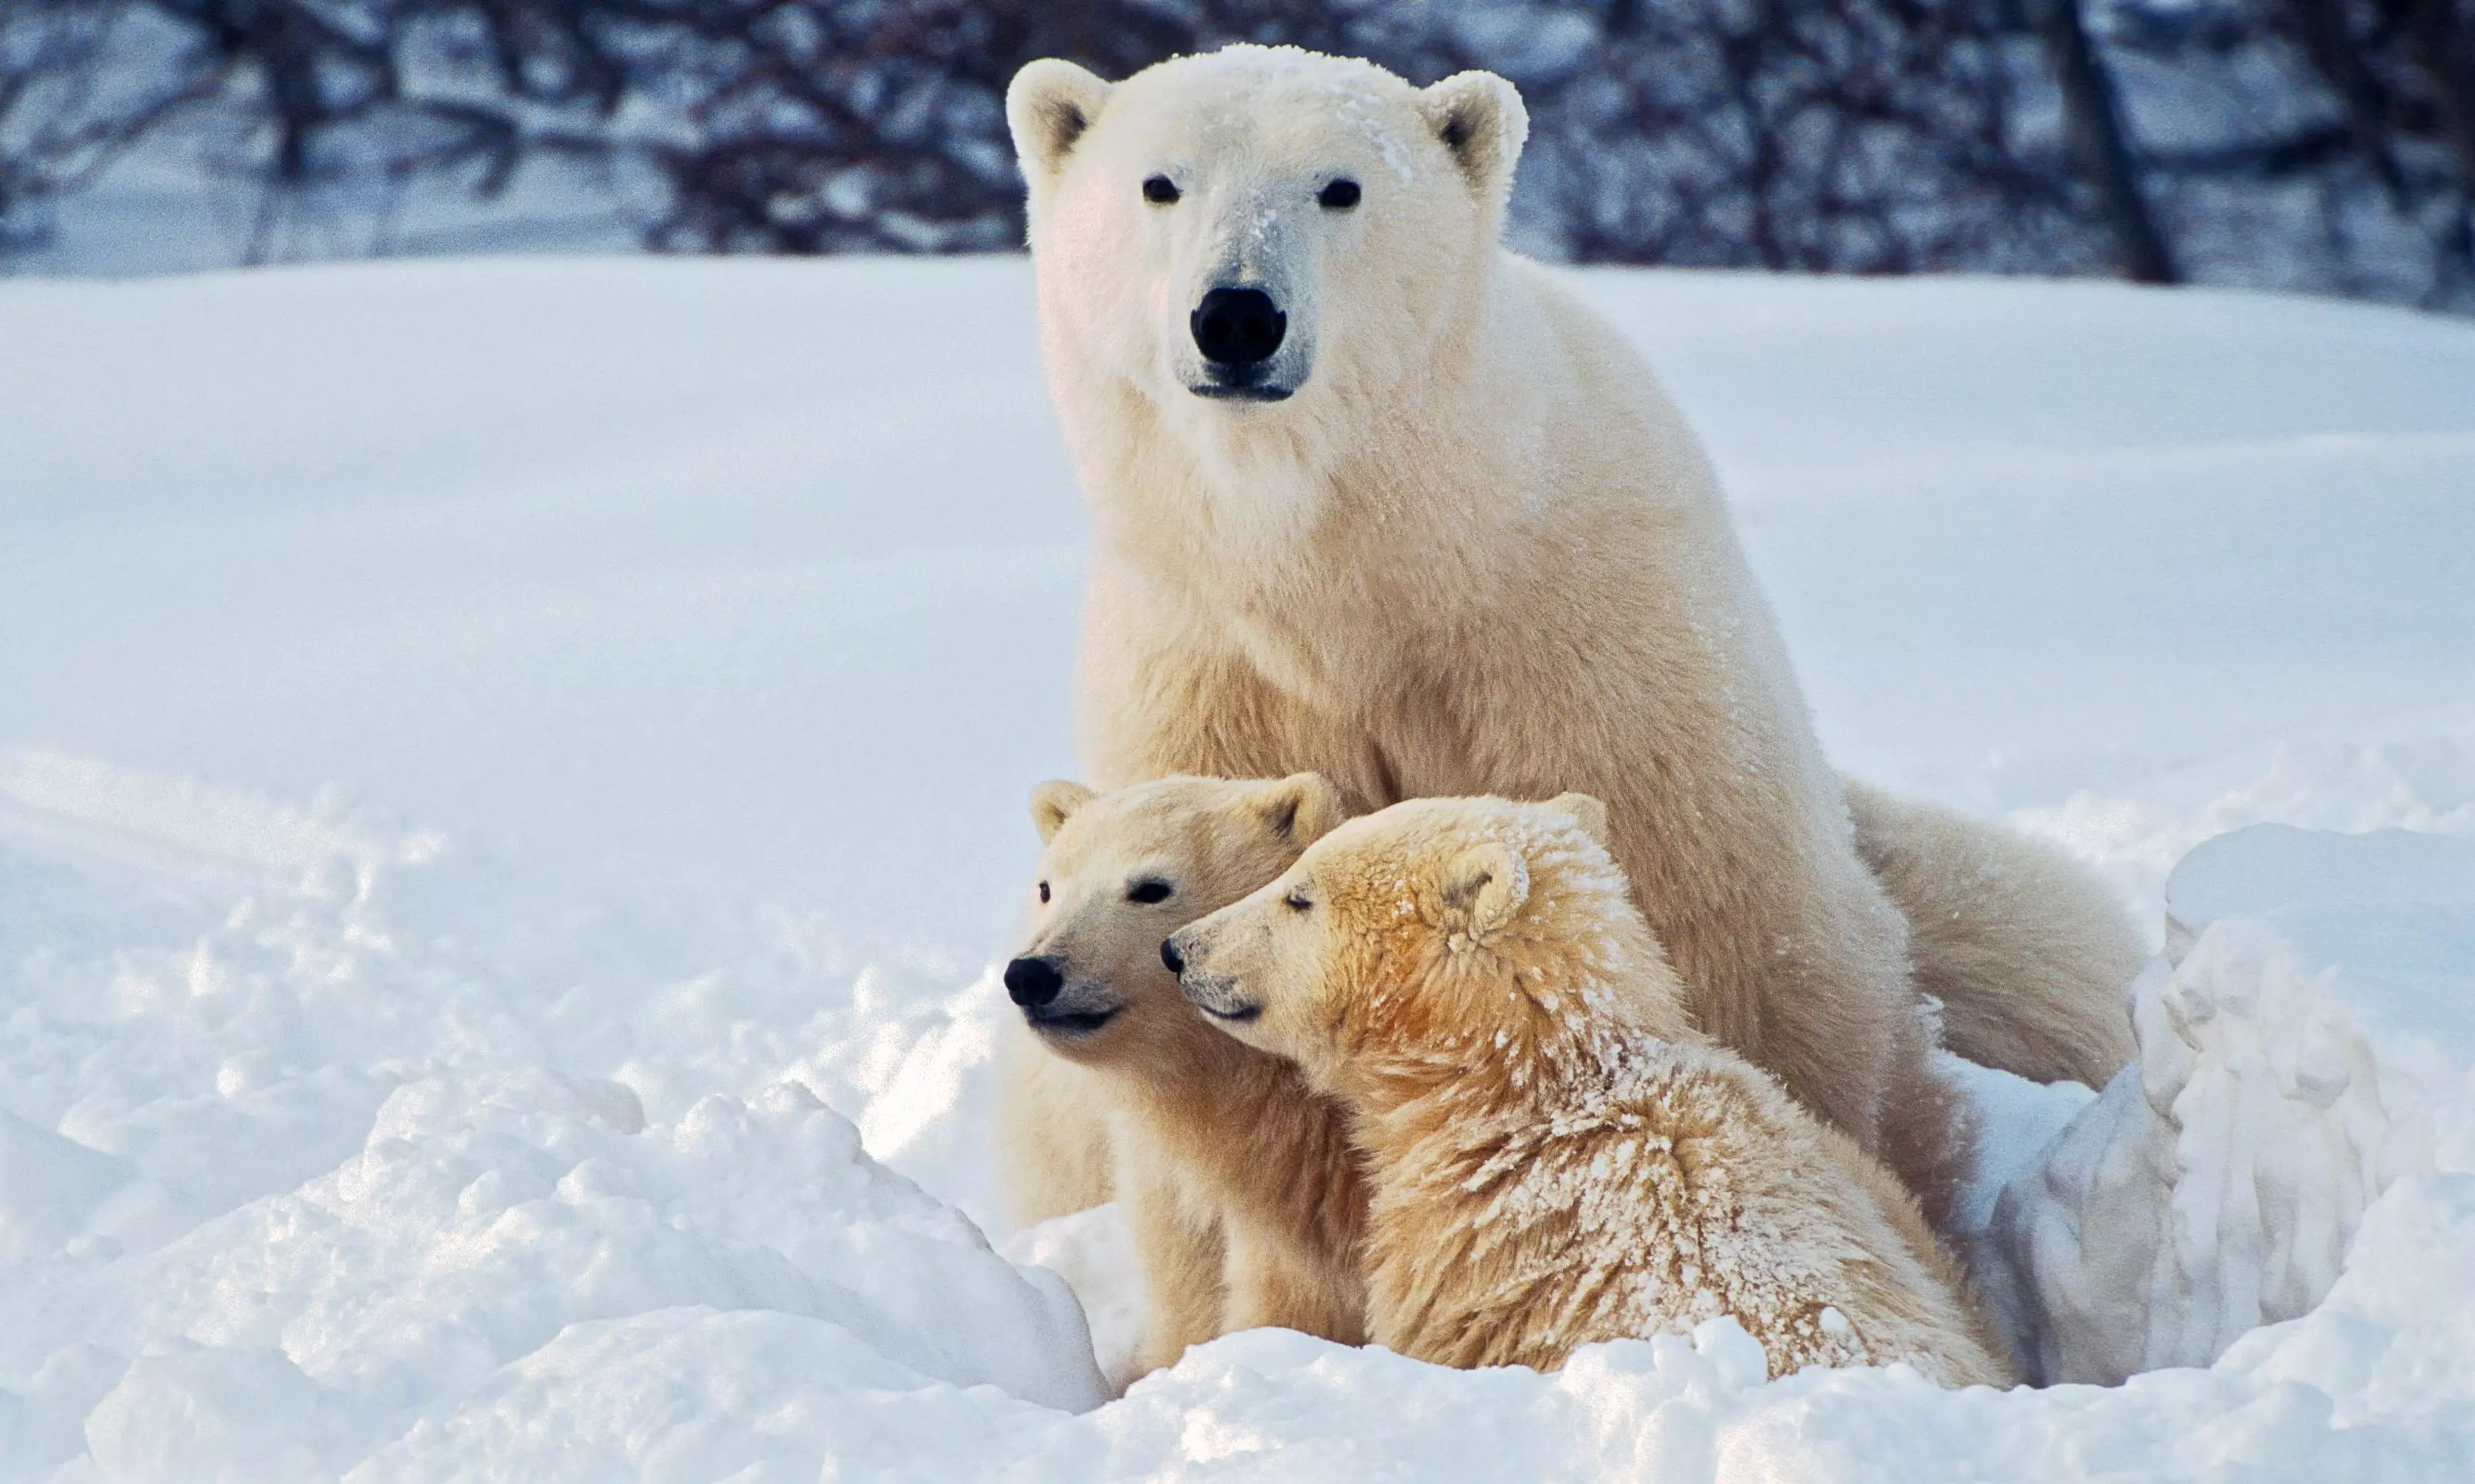 Rising sea temperatures are driving decline in polar bear numbers in Greenland: Study